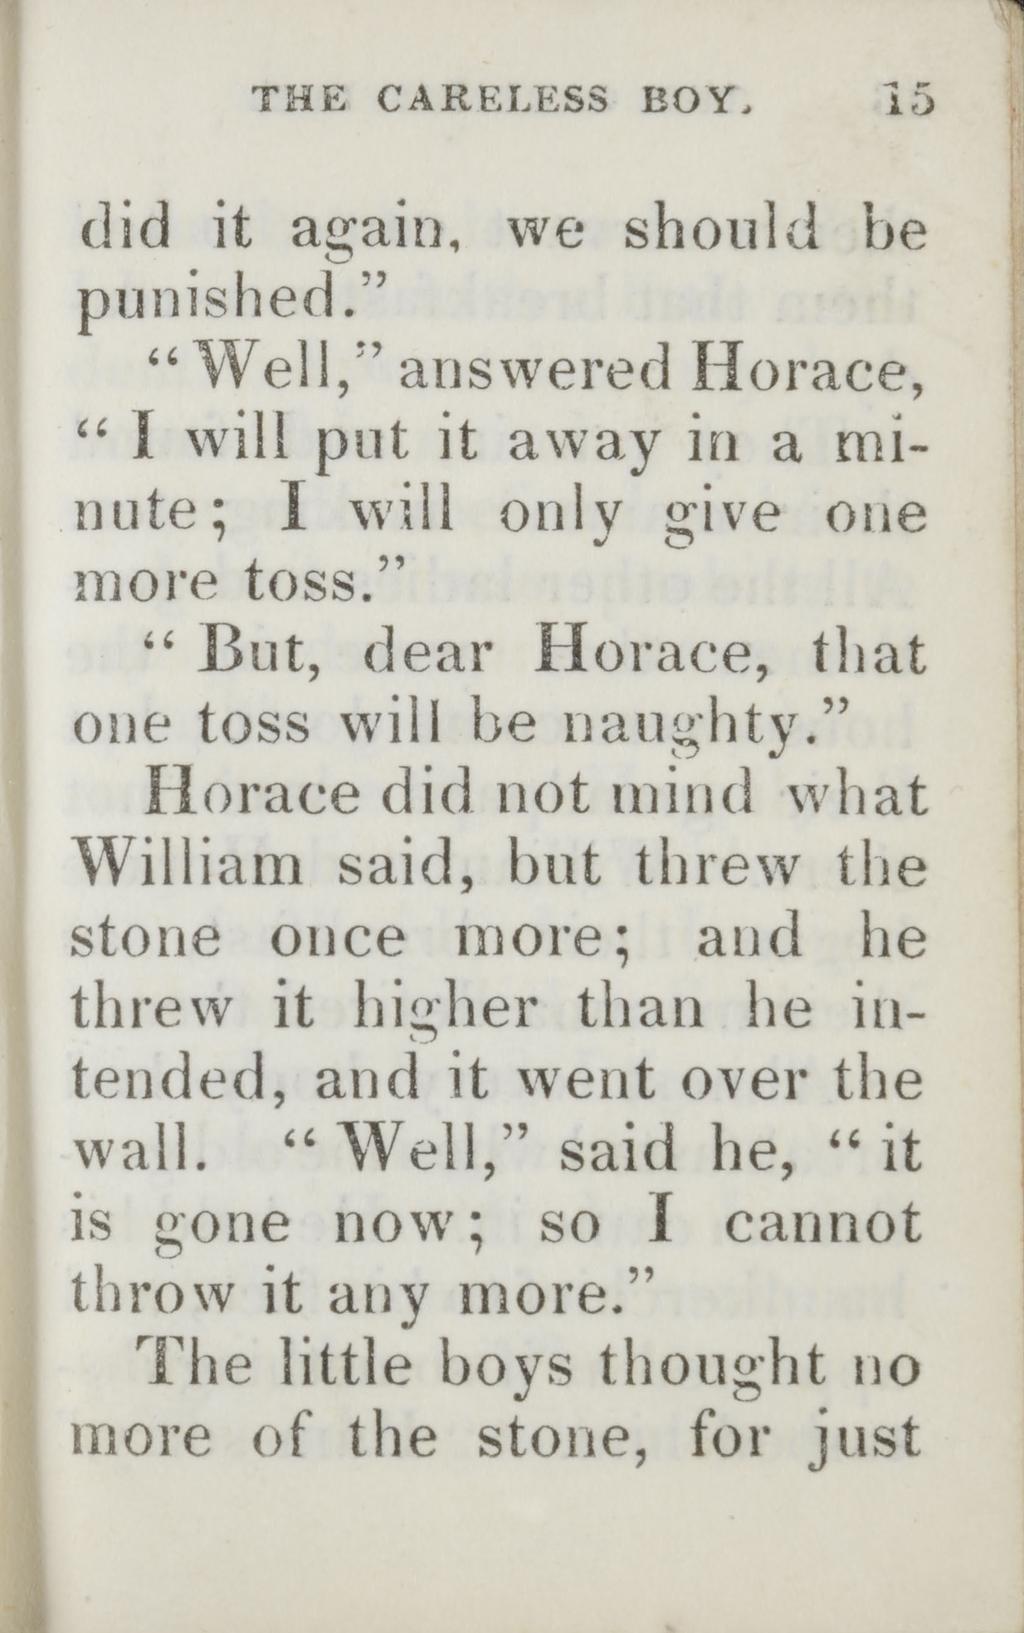 THE CARELESS BOY. l5 did it again, we should be punished. Well, answered Horace, I will put it away in a minute: I will only give one more toss. But, dear Horace, that one toss will be naughty.